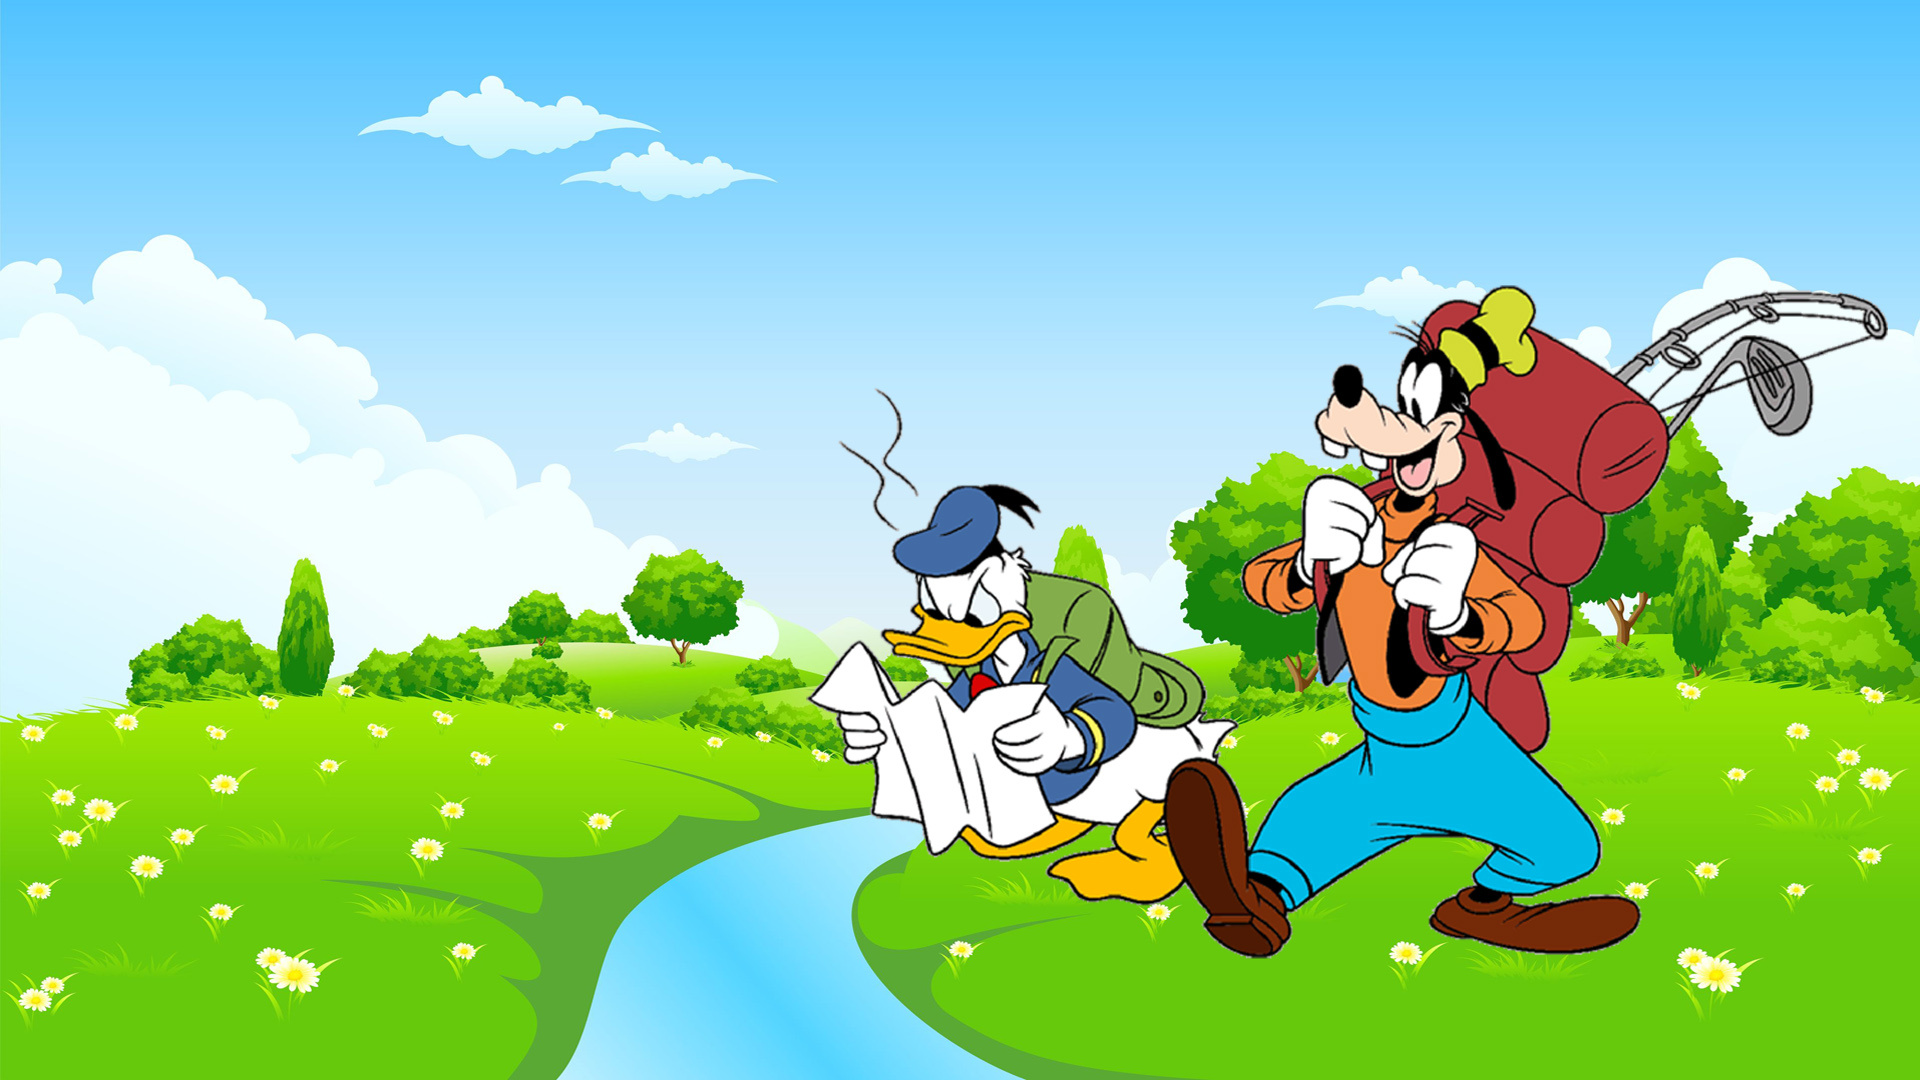 Donald Duck: Appeared as part of a comic trio with Mickey and Goofy. 1920x1080 Full HD Background.